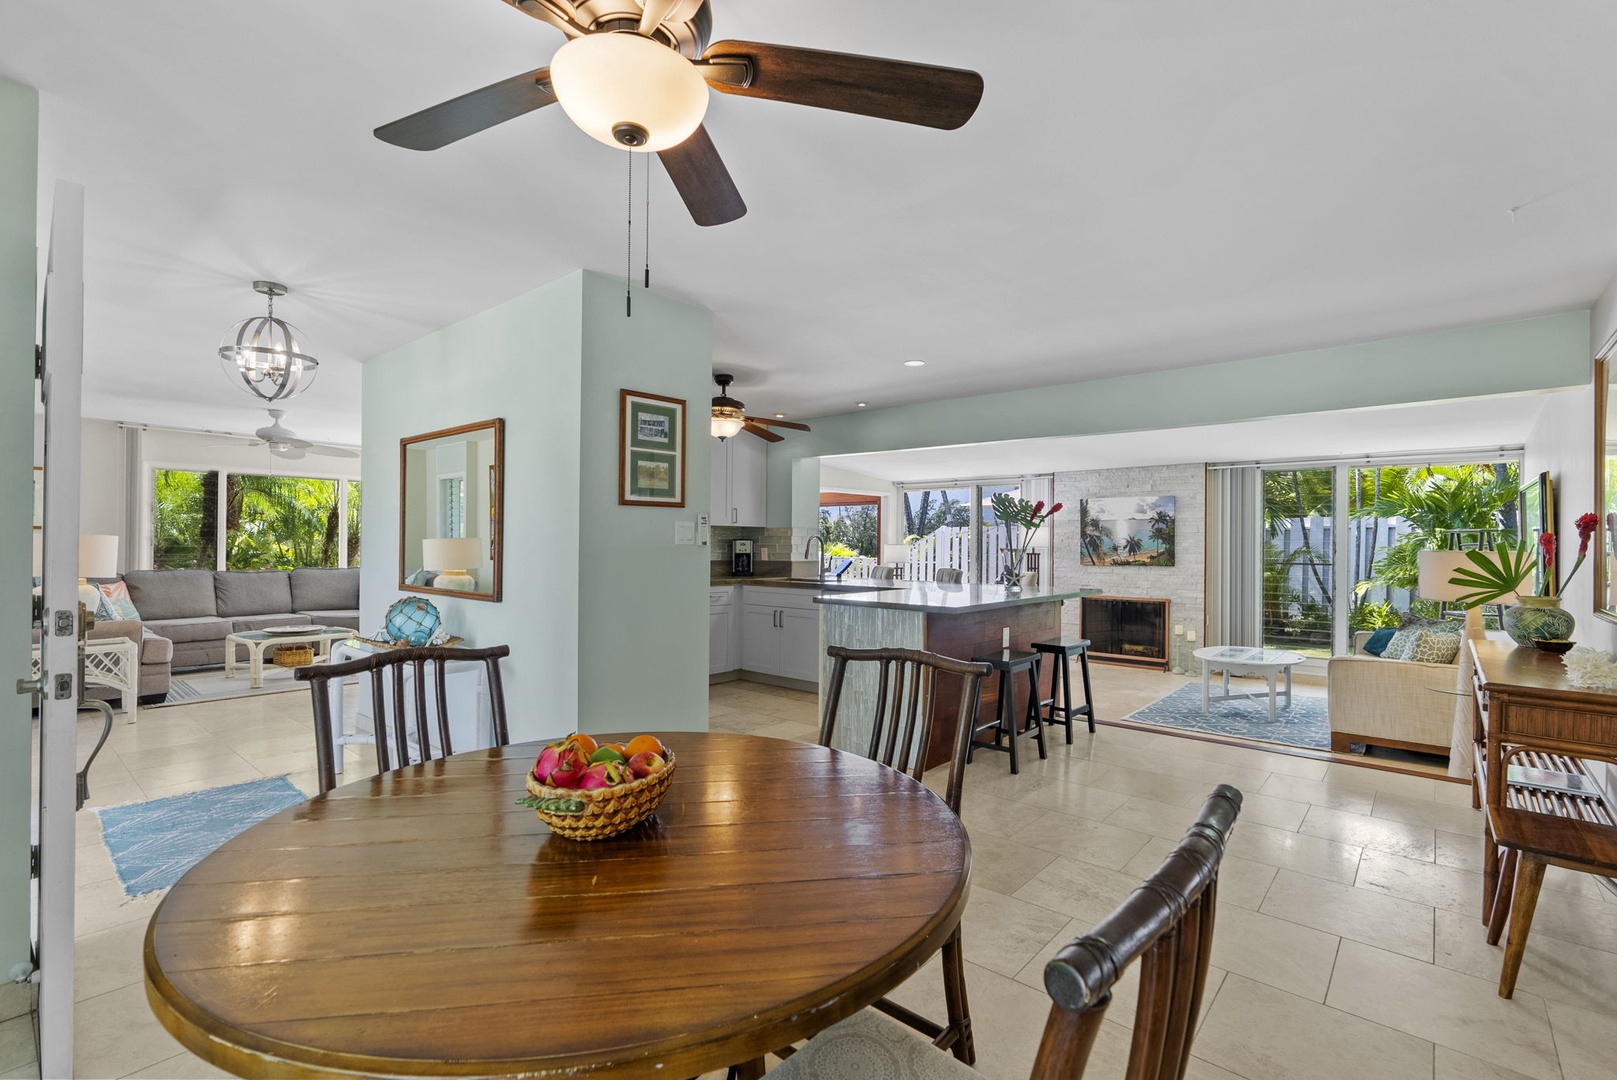 Kailua Vacation Rentals, Hale Aloha - Cozy breakfast nook, perfect for morning coffee and intimate conversations.